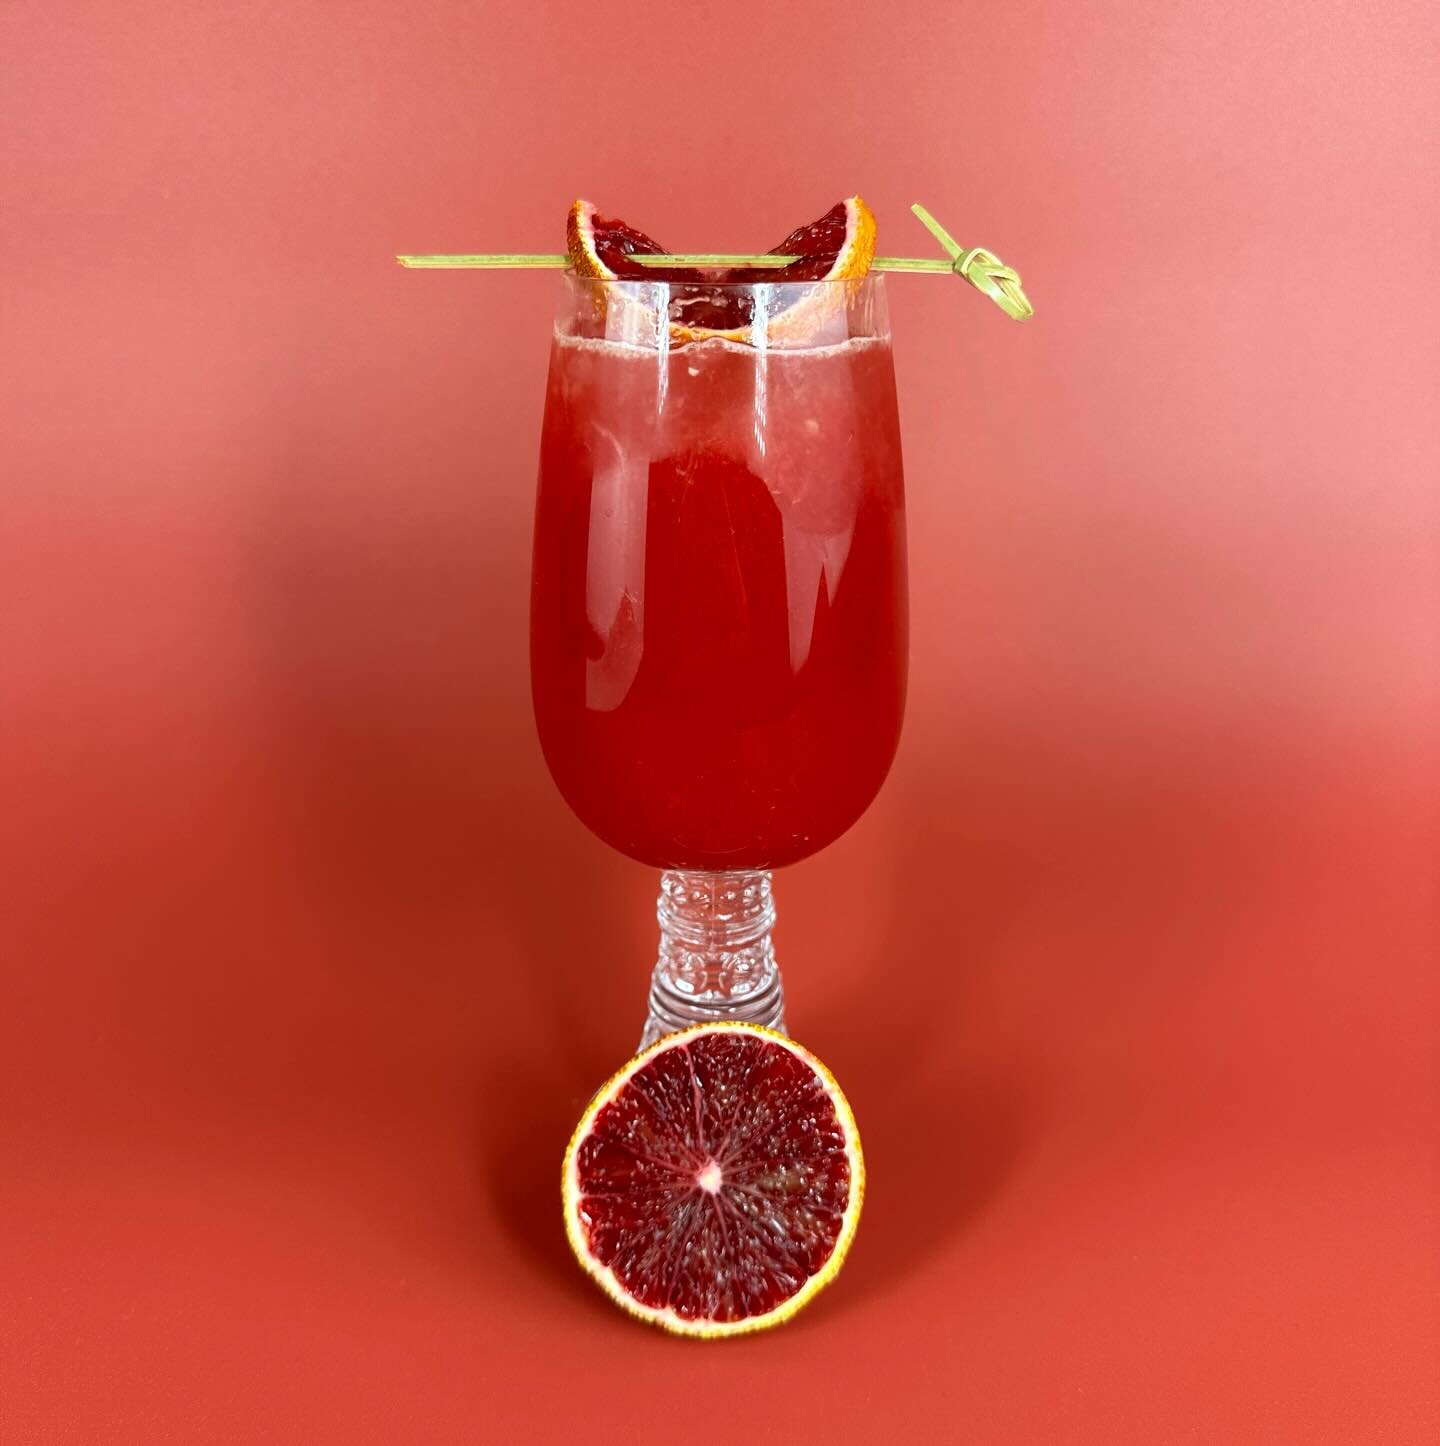 Whoever said mocktails aren&rsquo;t bringing sexy back has never tried our blood orange kiss!

Recipe in our reel

#valentines #valentinesday #valentinesmocktail #mocktails #red #love